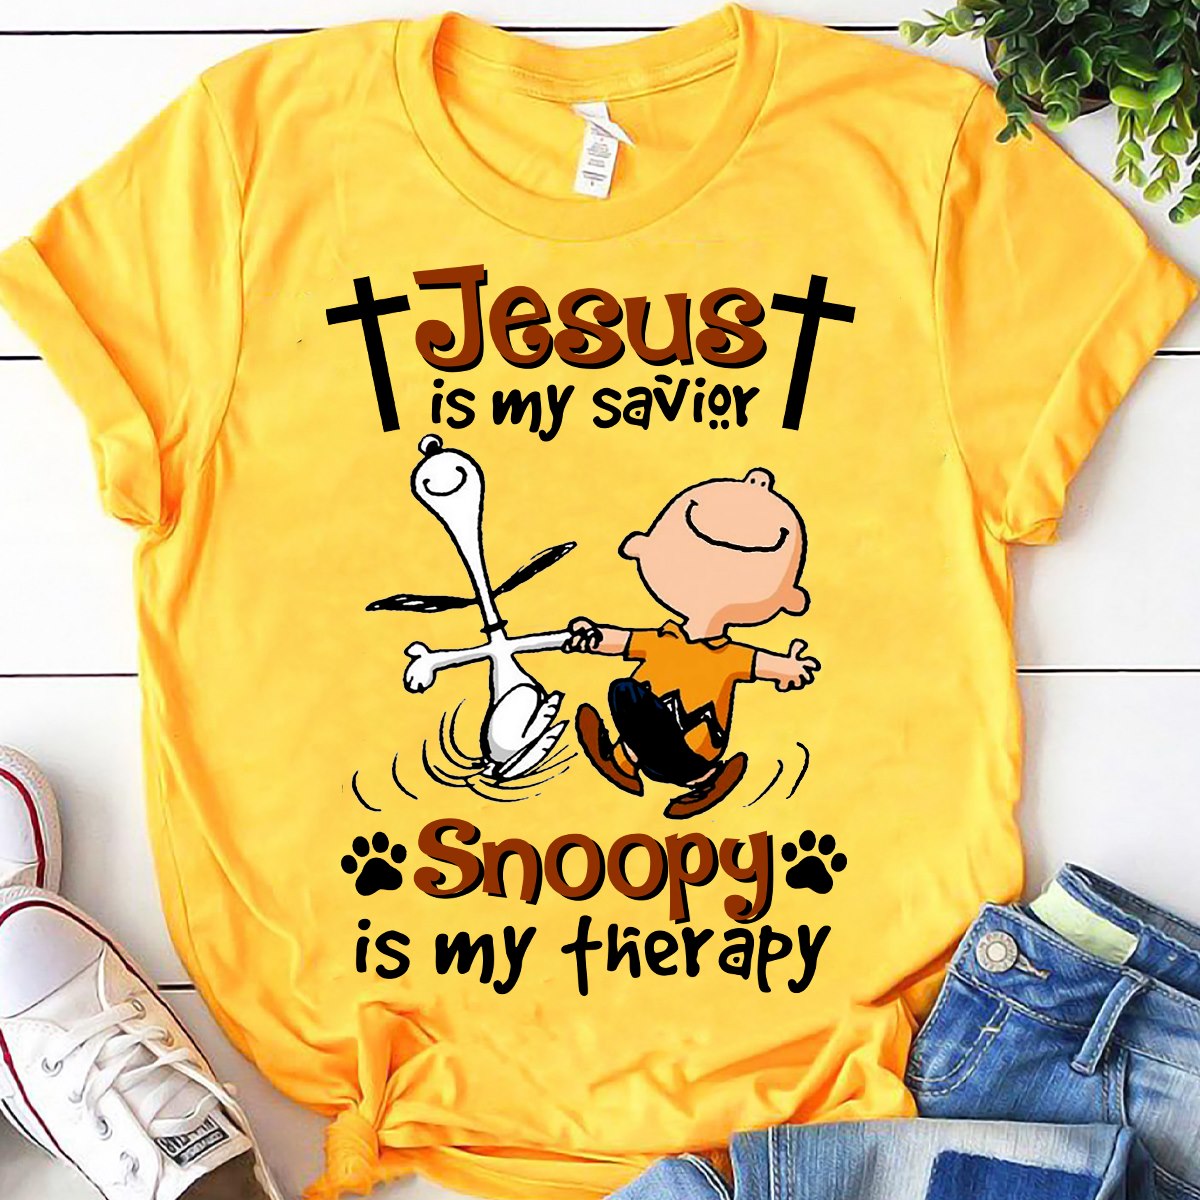 Jesus is my savior – Snoopy is my therapy